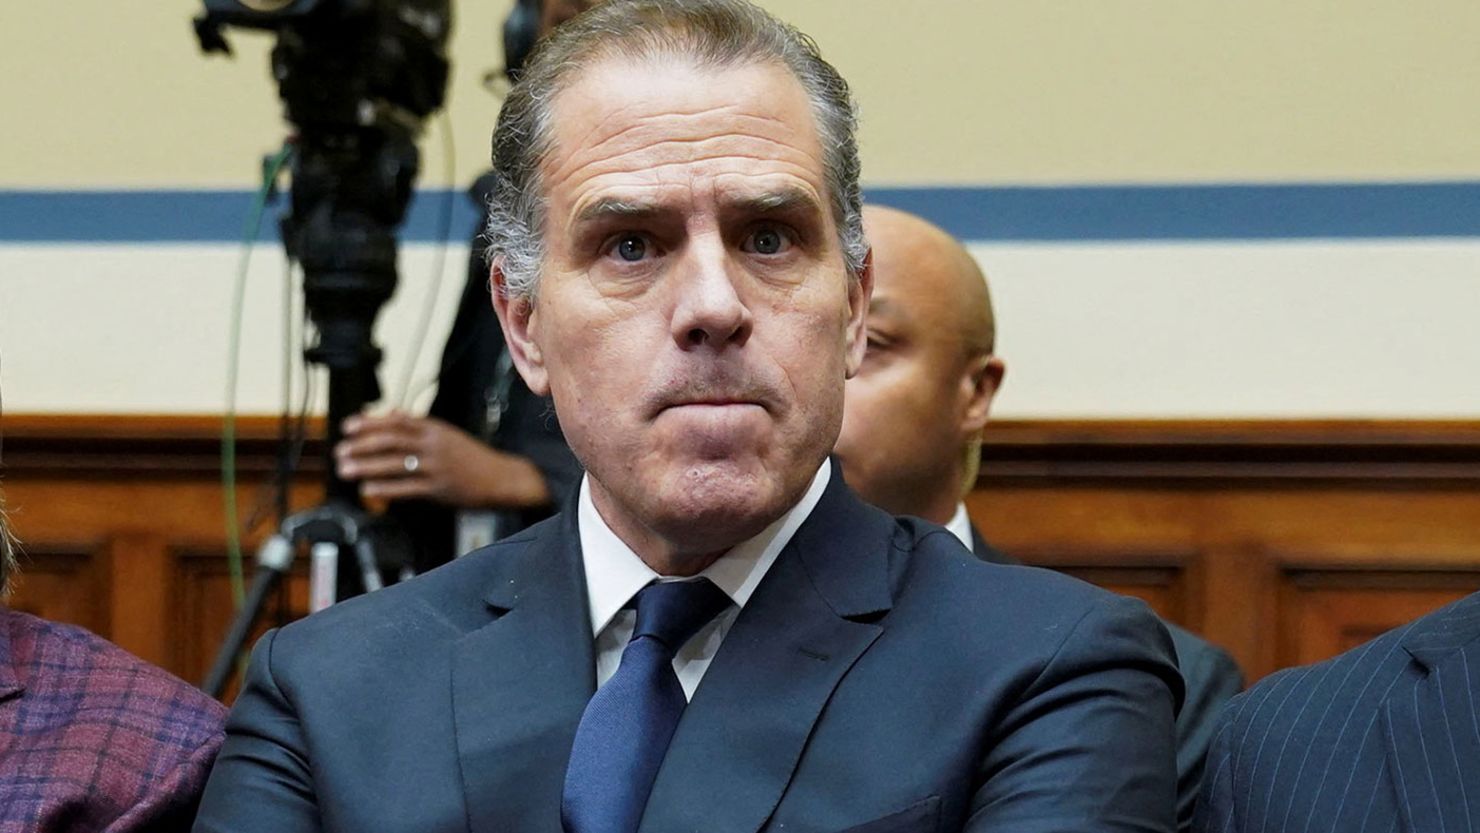 Hunter Biden, son of President Joe Biden, is seen as he makes a surprise appearance at a House Oversight Committee meeting in Washington, DC, on January 10, 2024.